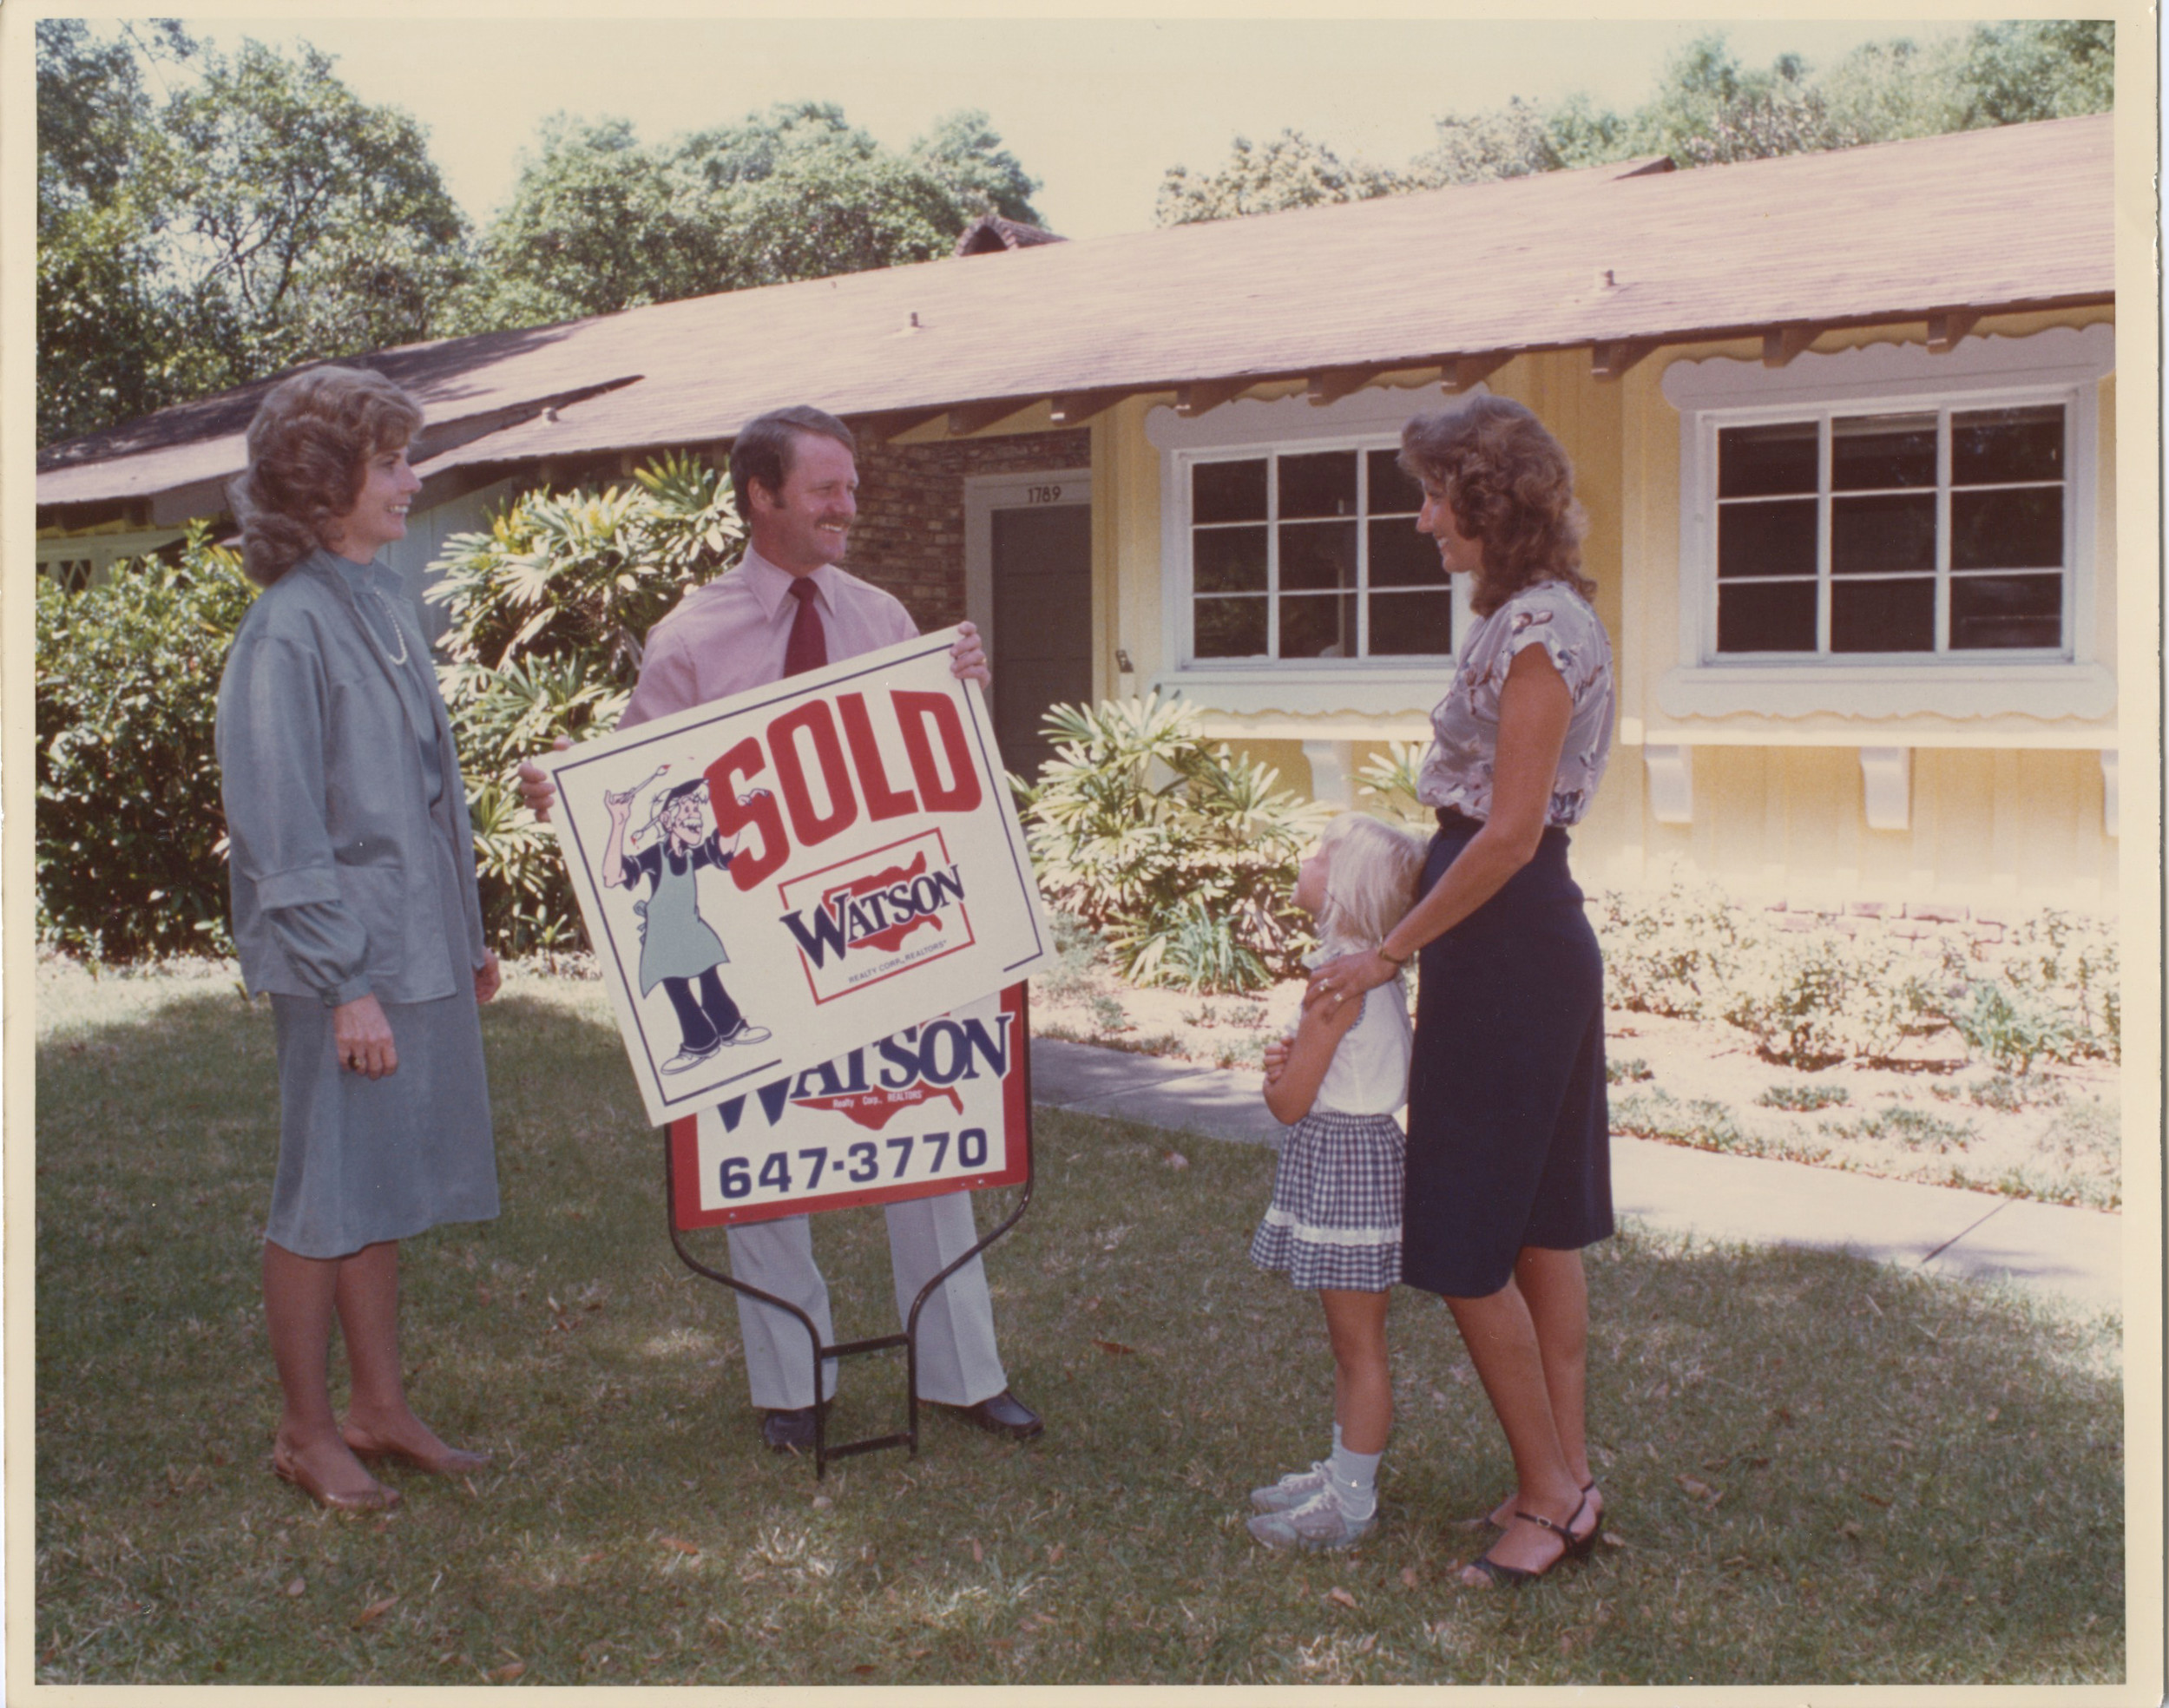 A "sold" sign in 1980.